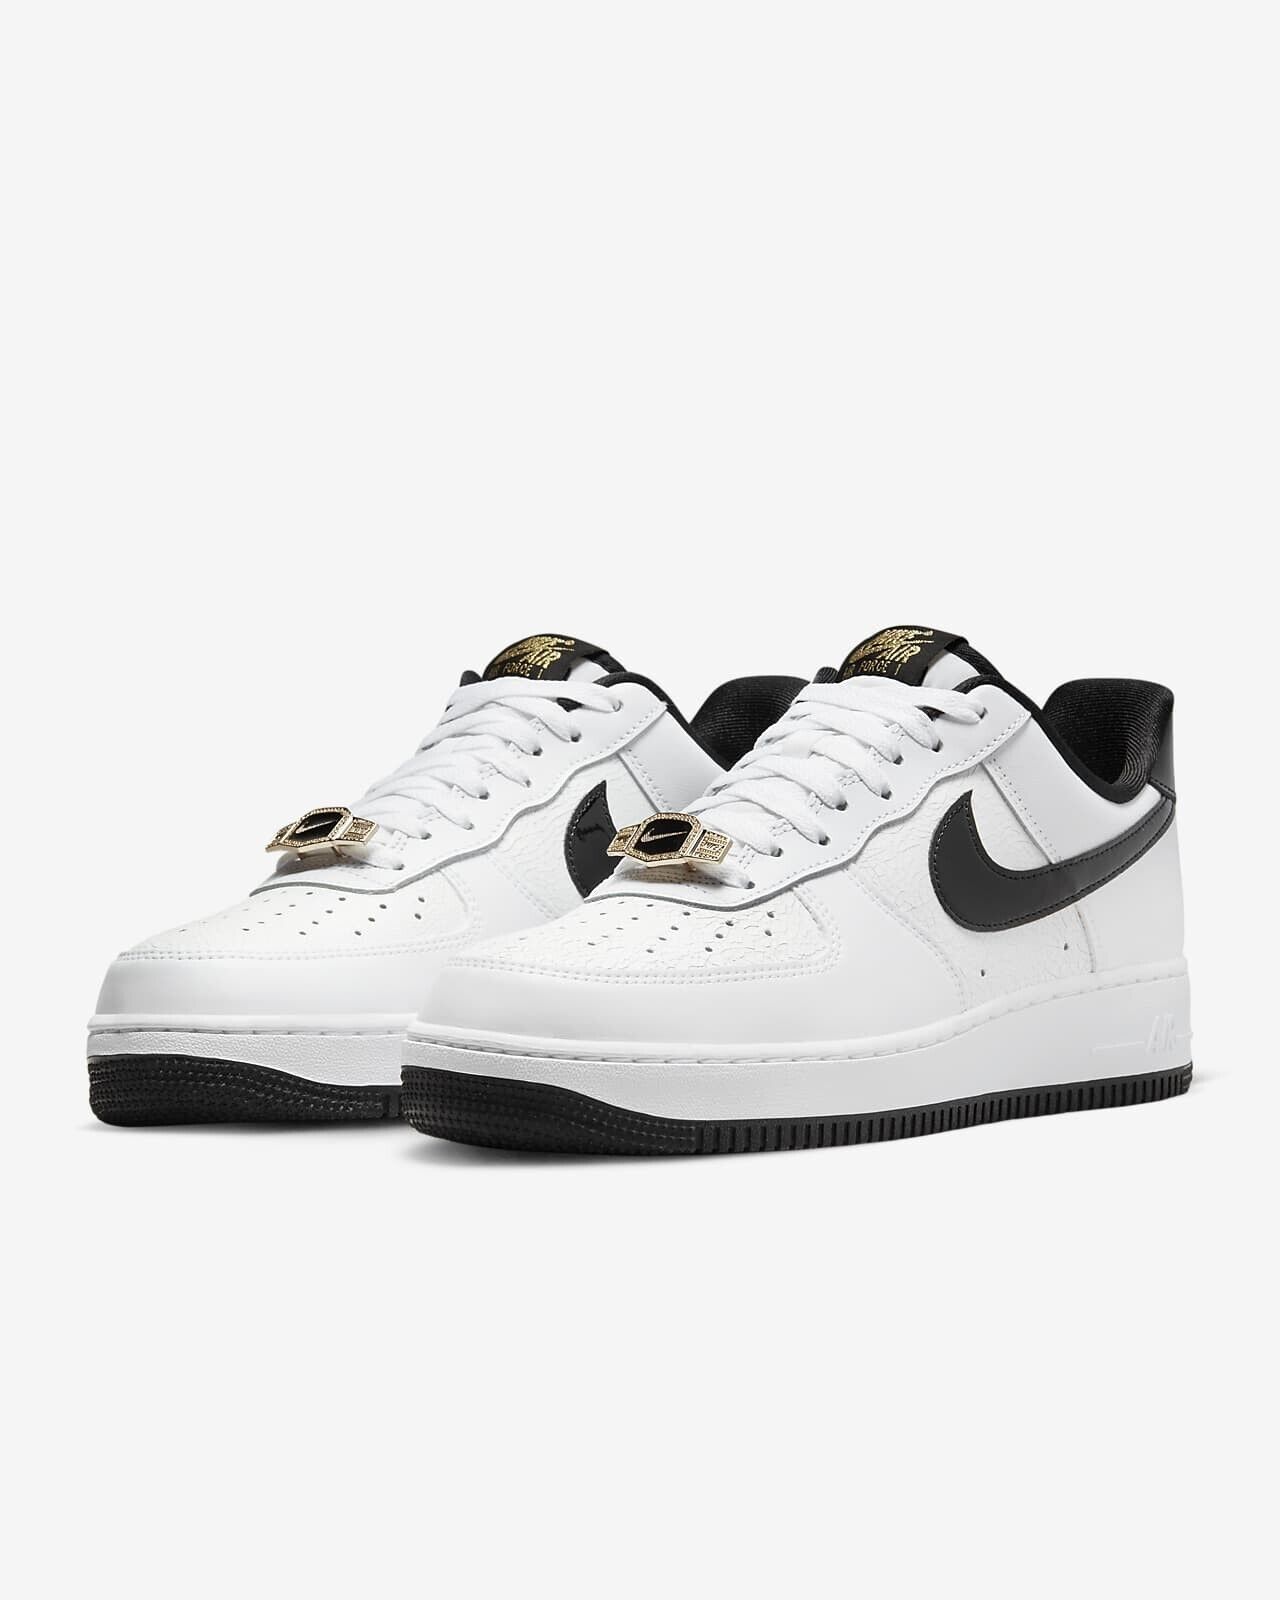 Buy Nike Air Force 1 High '07 LV8 EMB DX4980-001 - NOIRFONCE